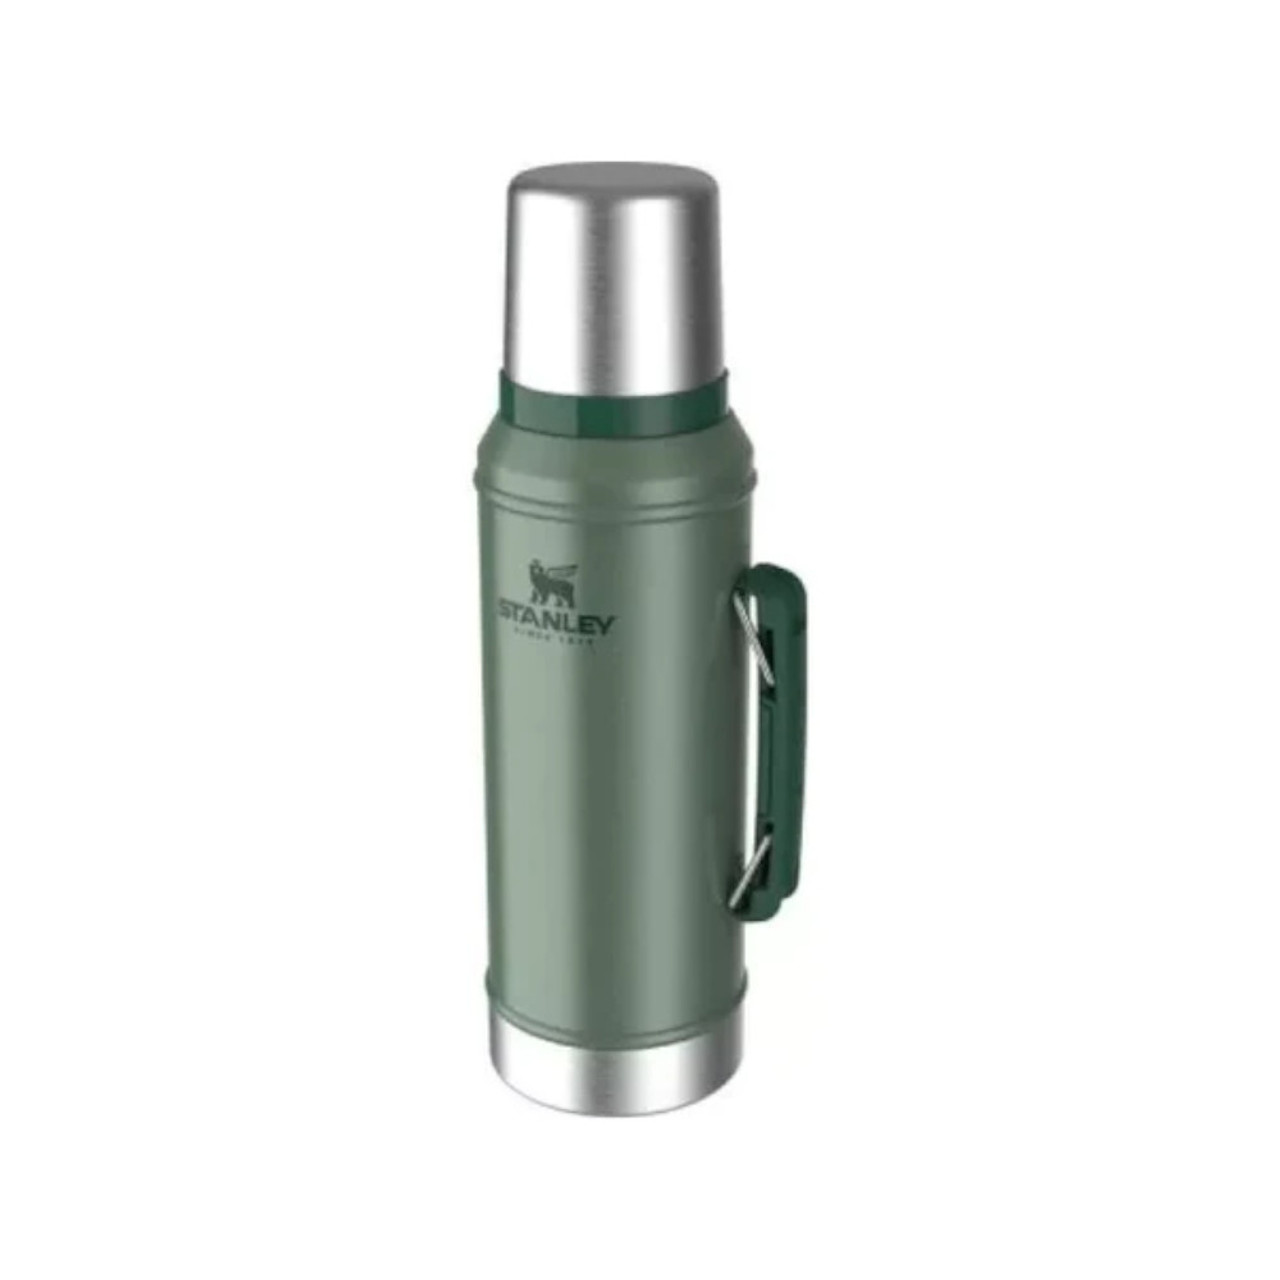 https://cdn11.bigcommerce.com/s-3stx4pub31/images/stencil/1280x1280/products/9358/25909/kyma-stanley-thermos-950-verde-2__51470.1696019772.jpg?c=2?imbypass=on